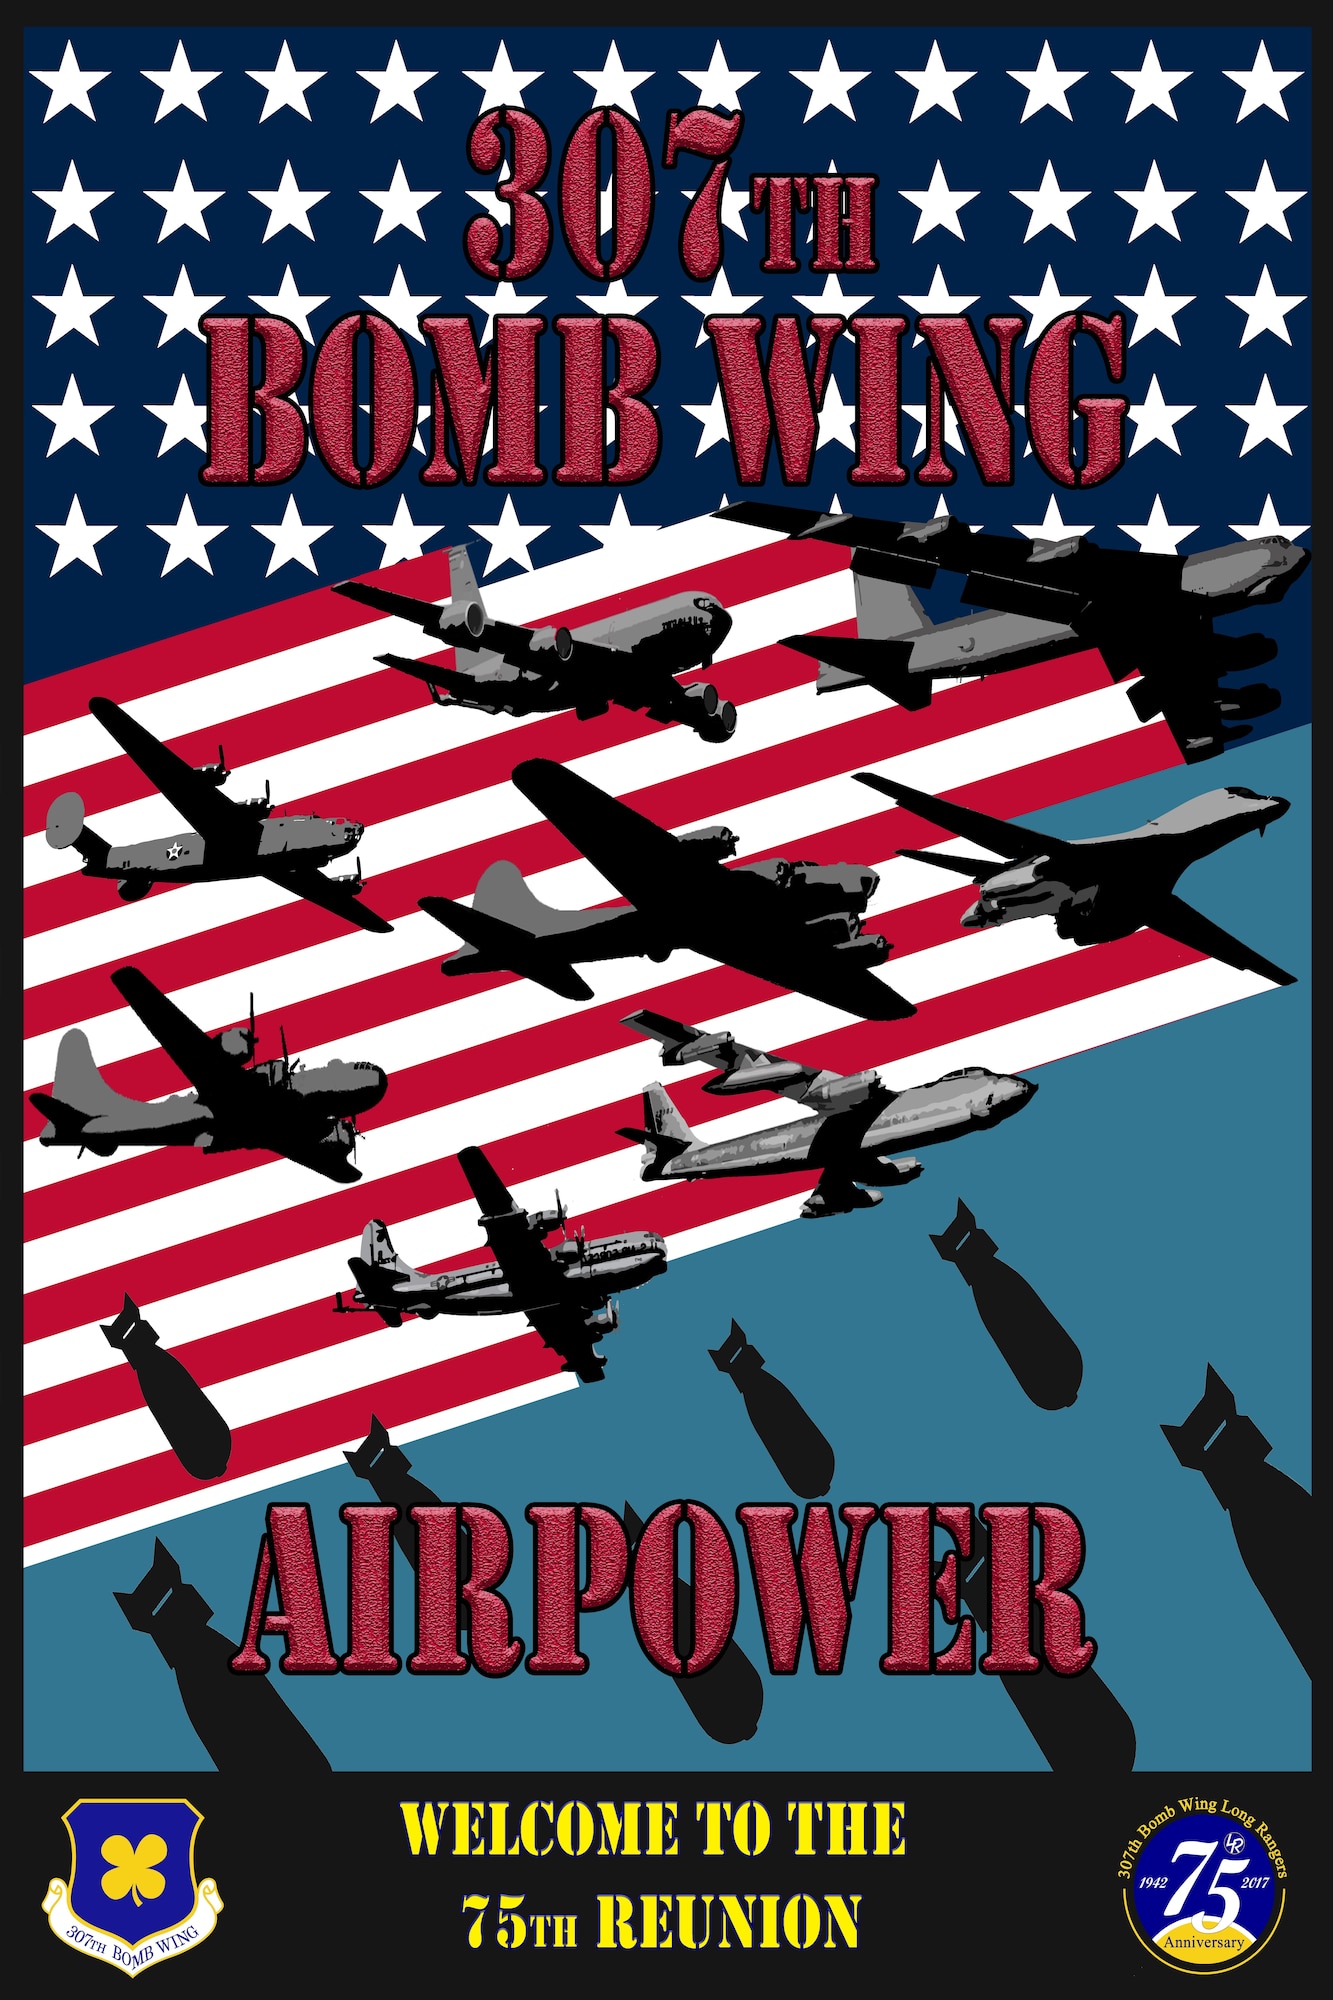 Poster Celebrating the 307th Bomb Wing's 75th Anniversary and reunion.